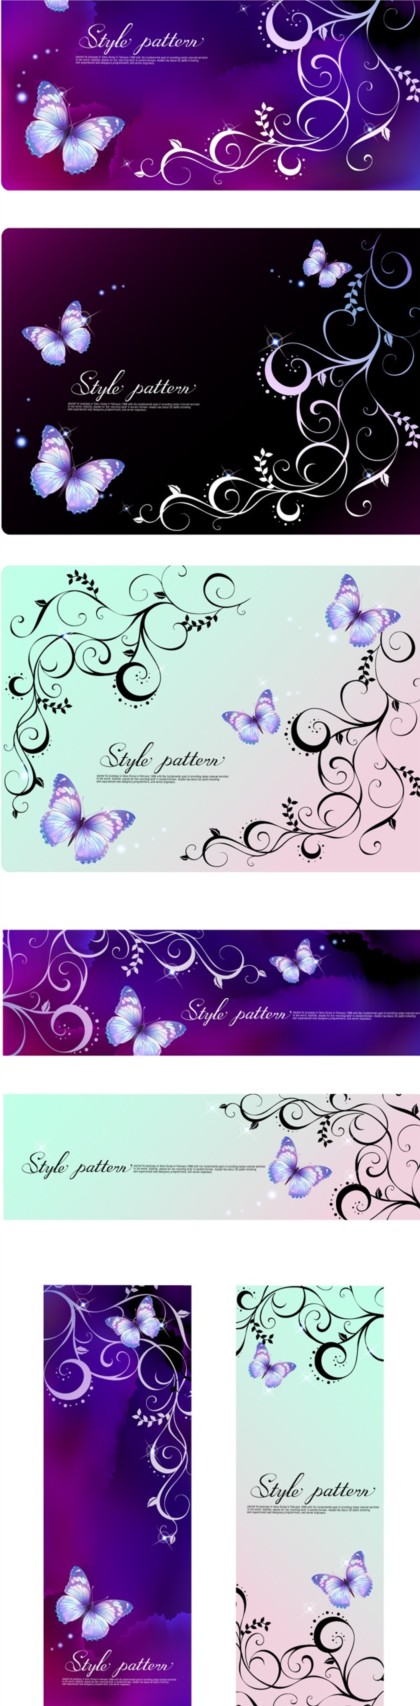 purple butterfly banner background 